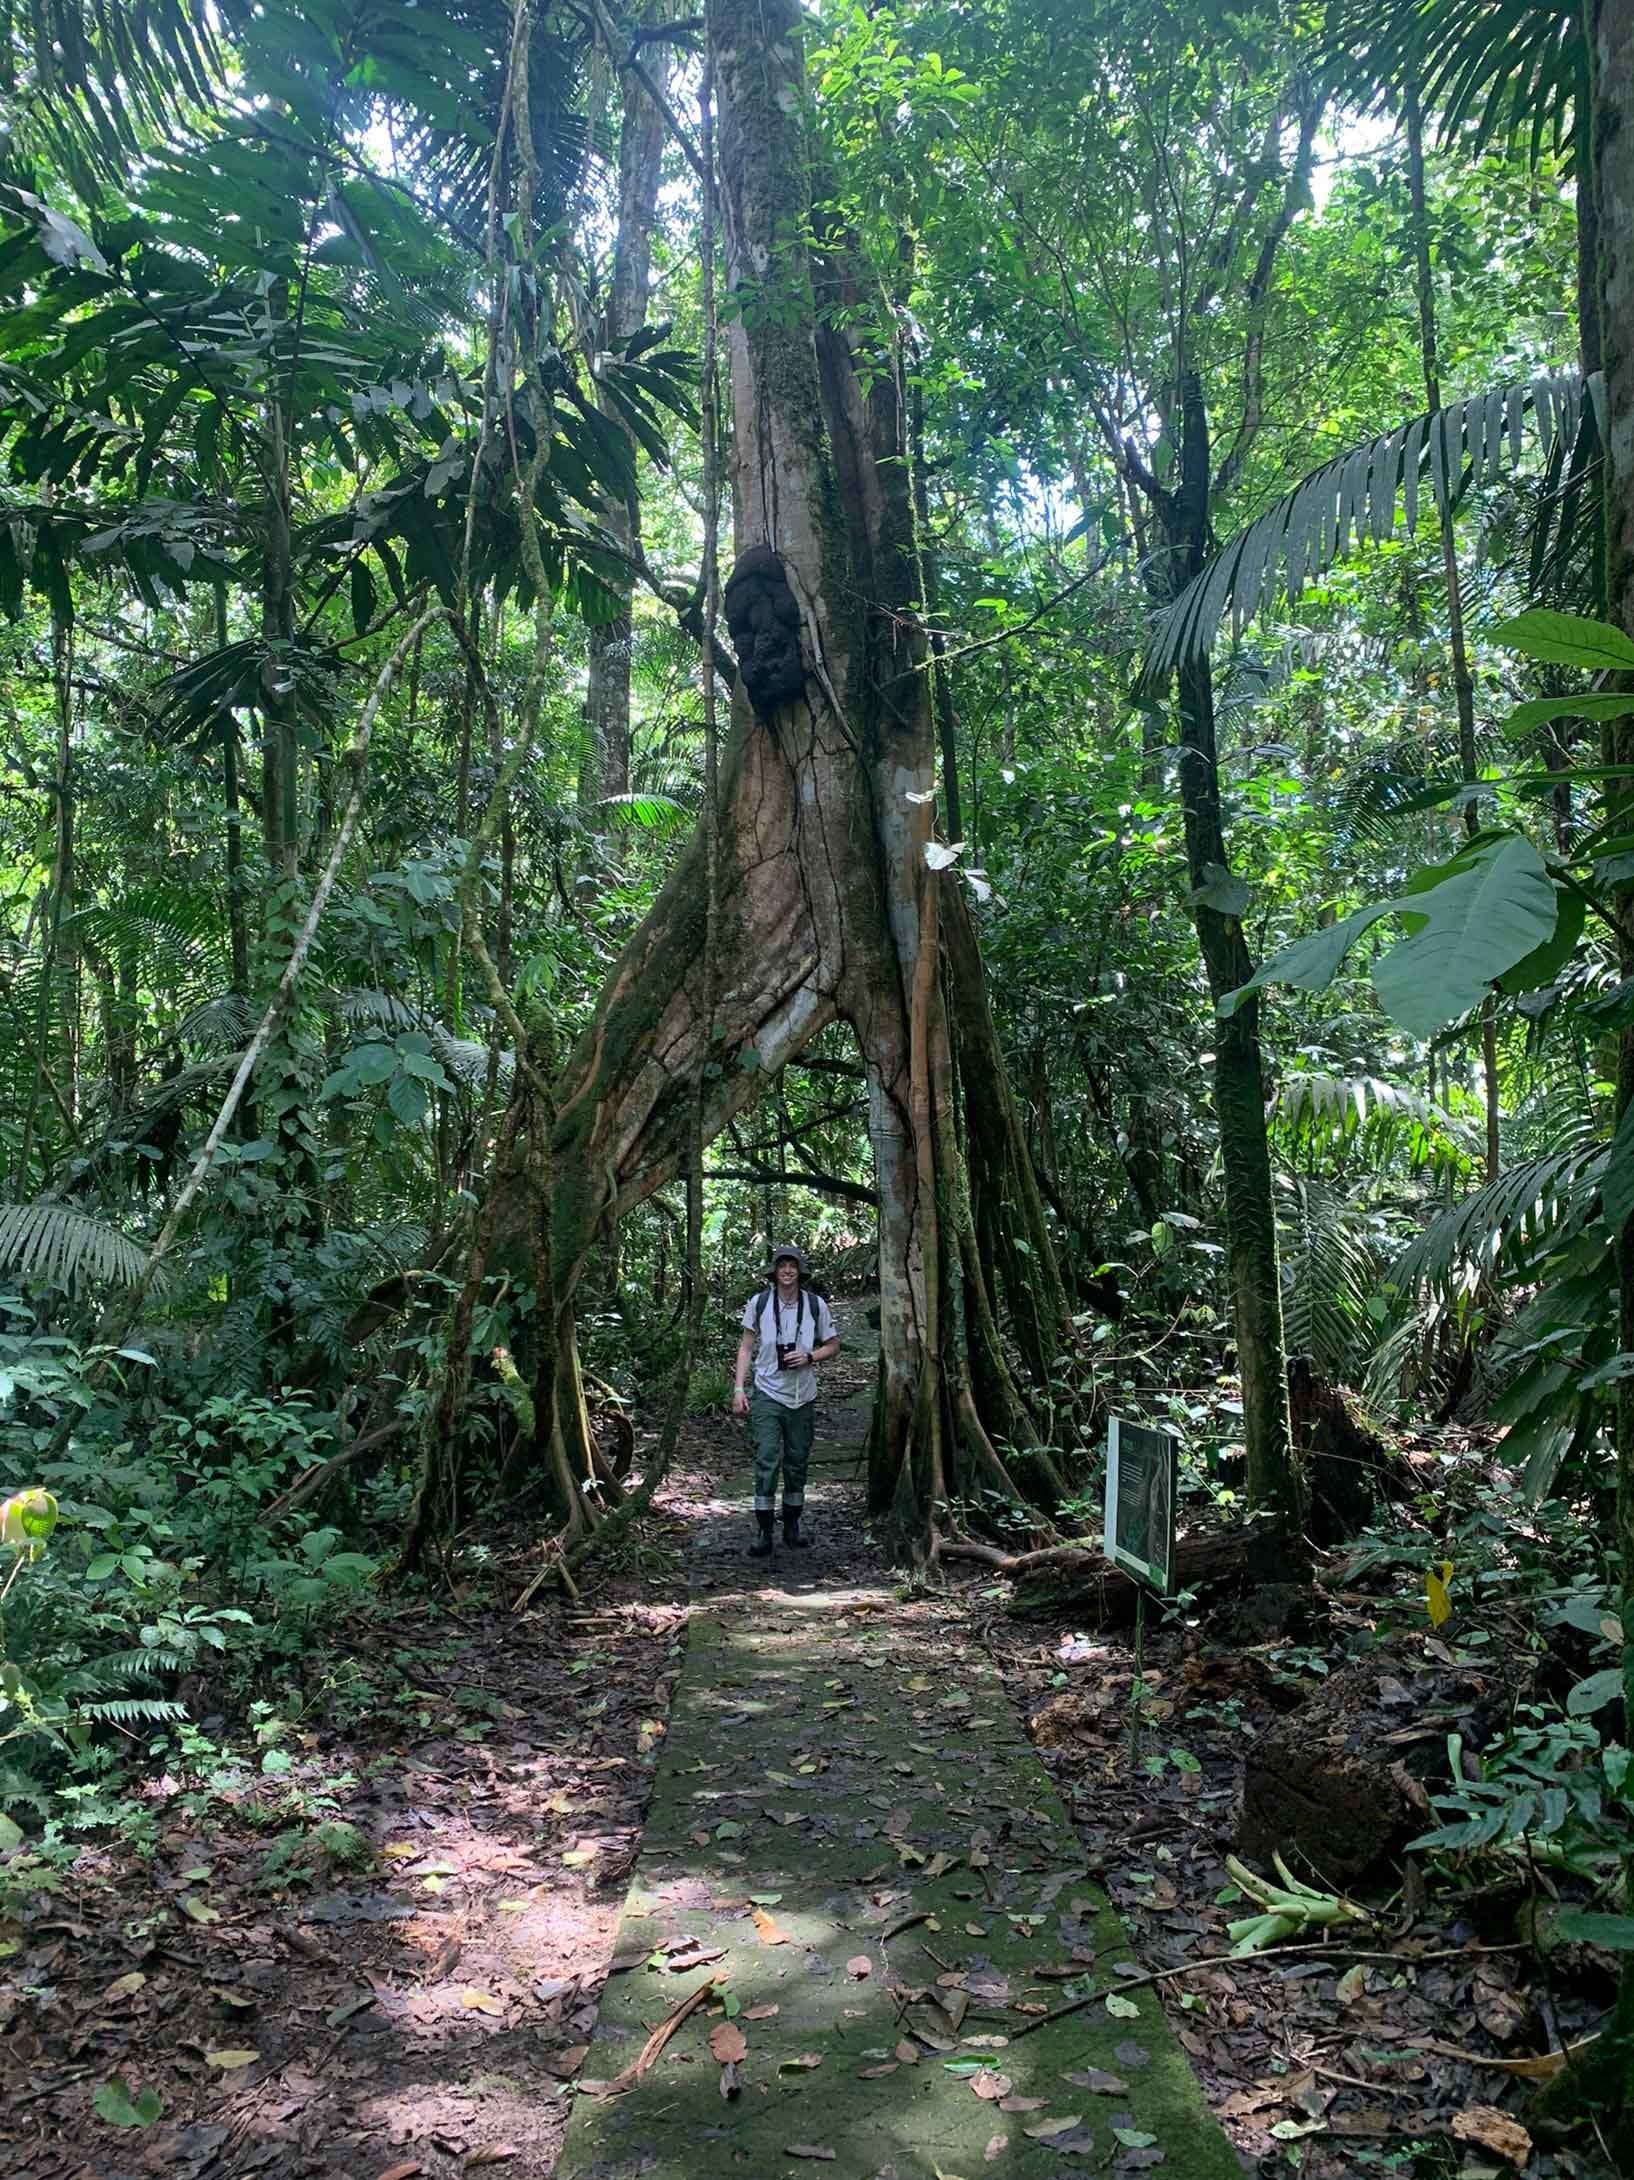 Student pictured under a giant tree in Costa Rica